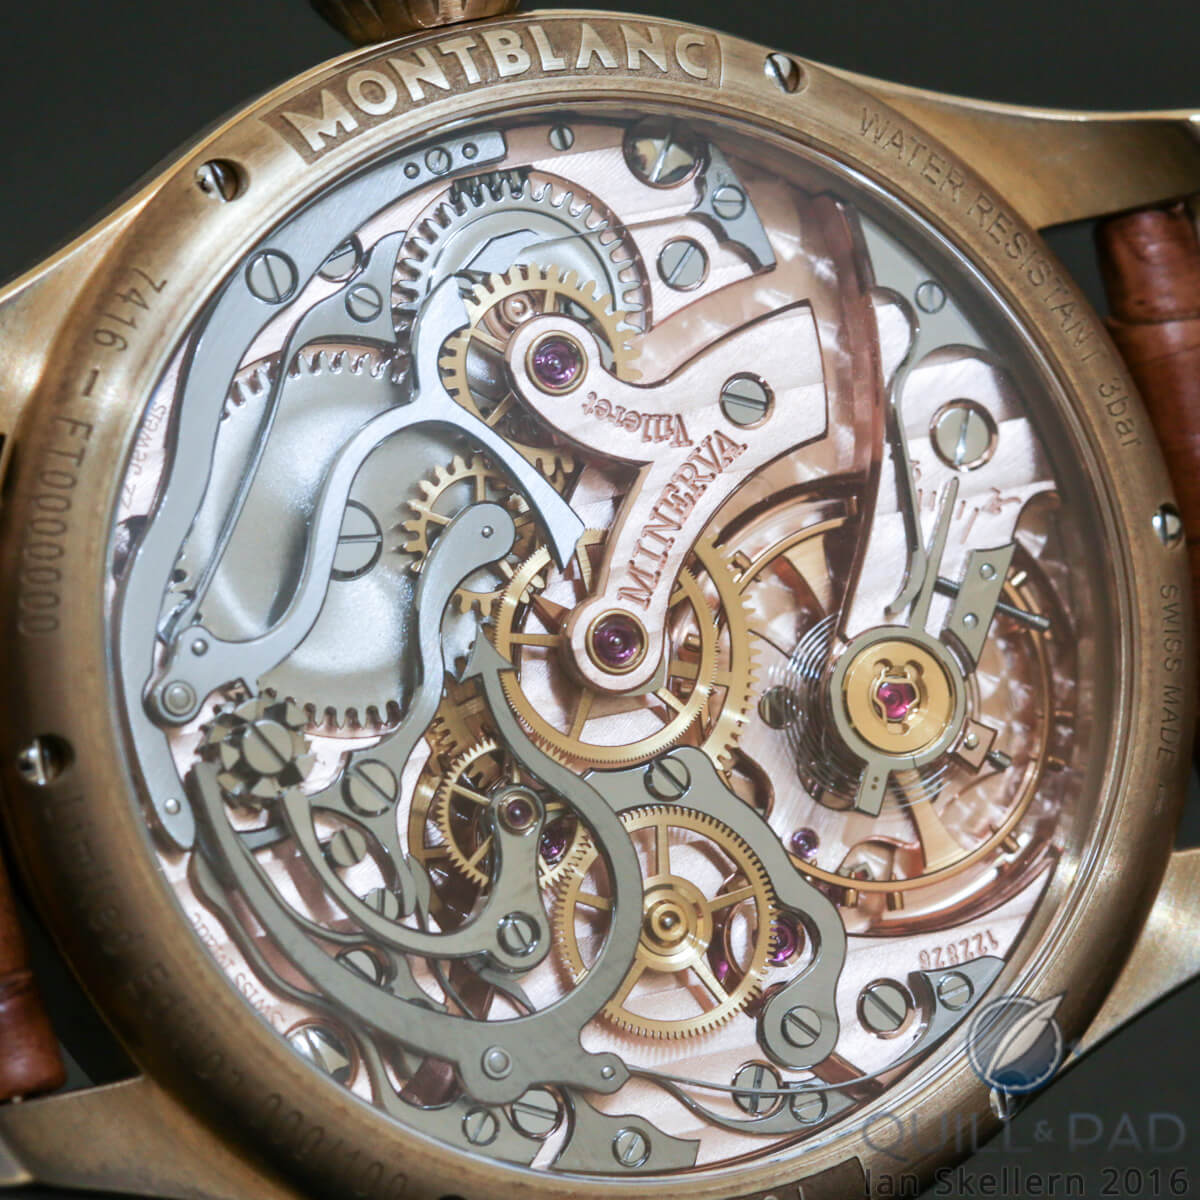 Beautiful movement of the Montblanc 1858 Chronograph Tachymeter